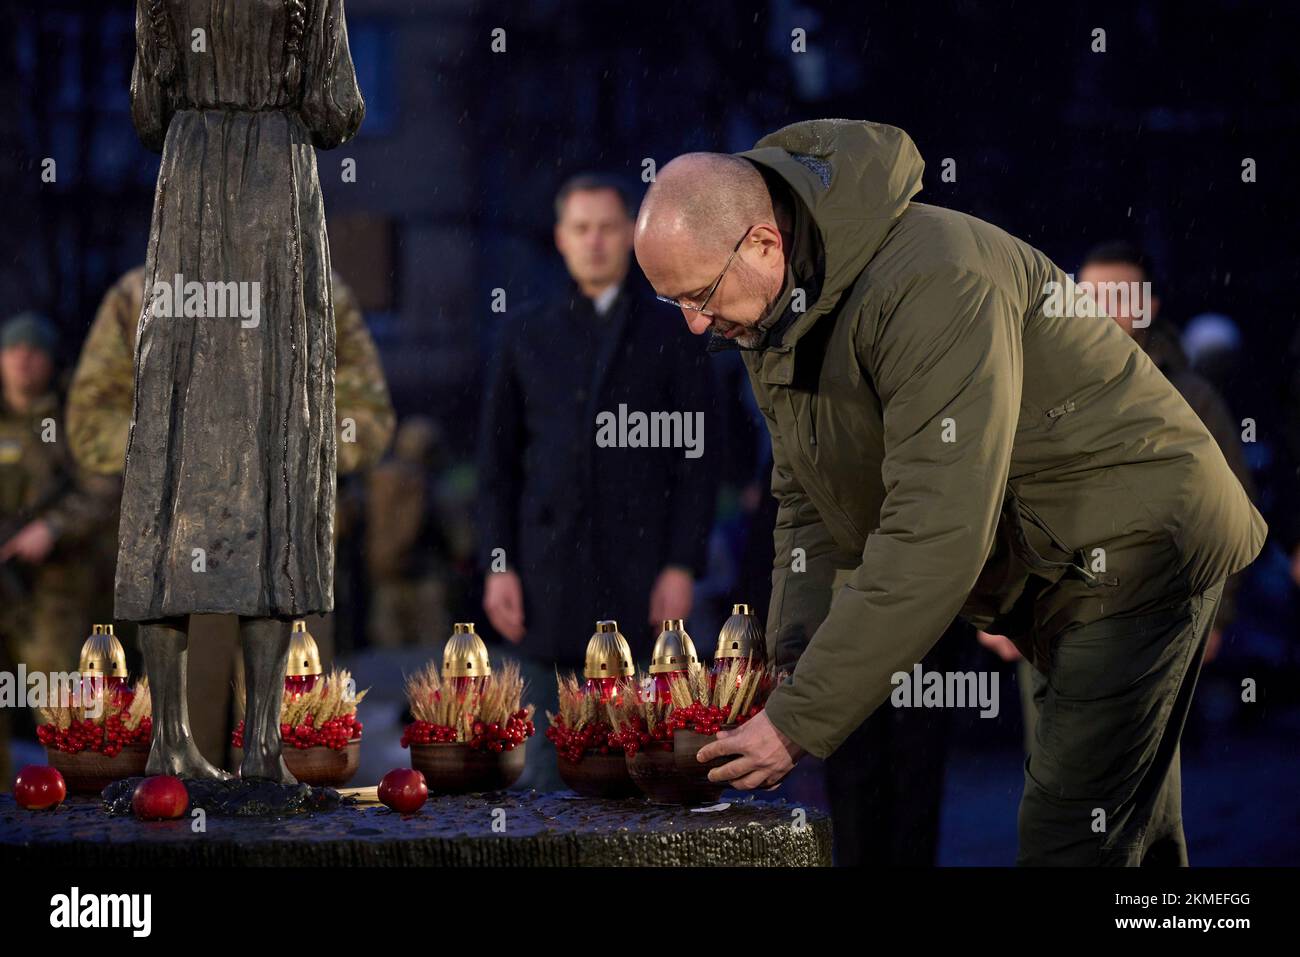 Kyiv, Ukraine. 26th Nov, 2022. Ukrainian Prime Minister Denys Shmyhal places a lantern at the Bitter Memory of Childhood statue in honor of the 90th anniversary of the Holodomor famine, November 26, 2022 in Kyiv, Ukraine. Credit: Ukraine Presidency/Ukrainian Presidential Press Office/Alamy Live News Stock Photo